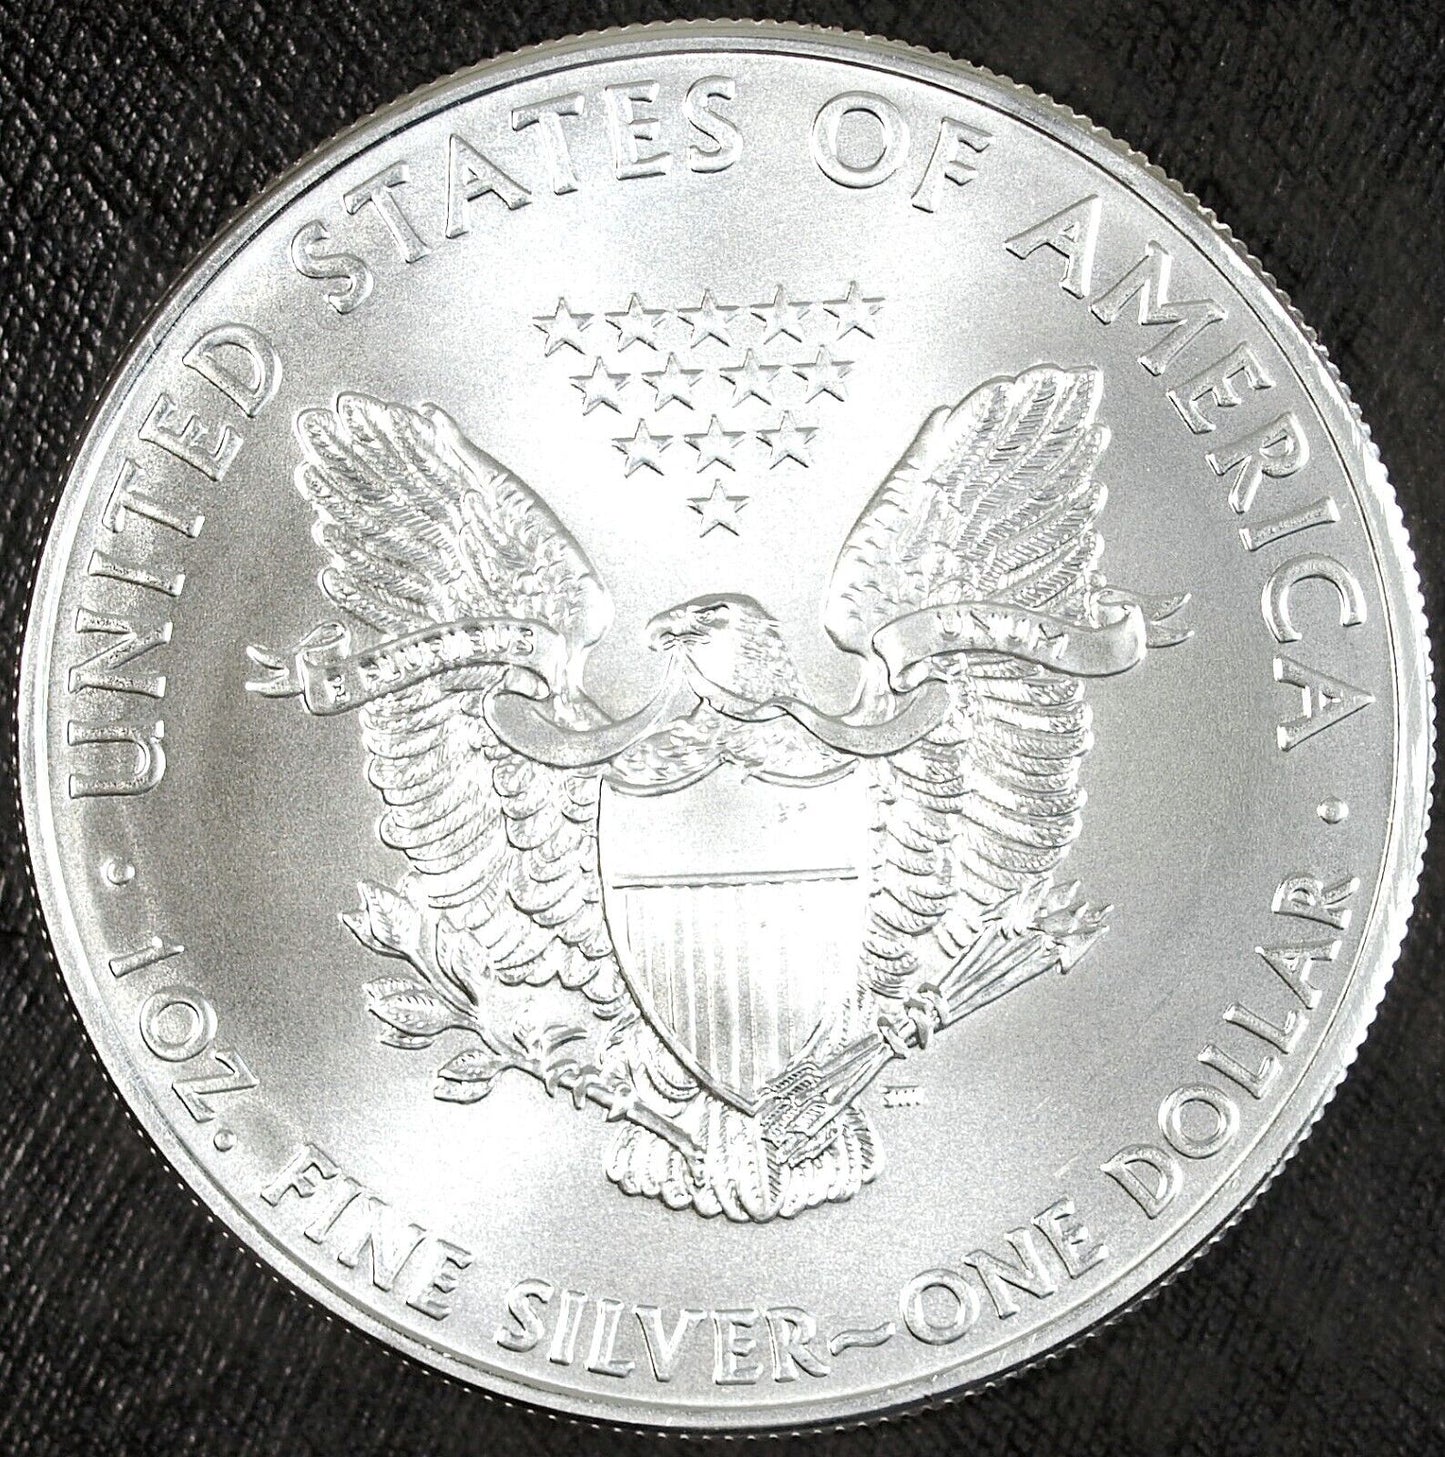 2011 U.S. Mint American Silver Eagle ☆☆ Uncirculated ☆☆ Great Collectible 501